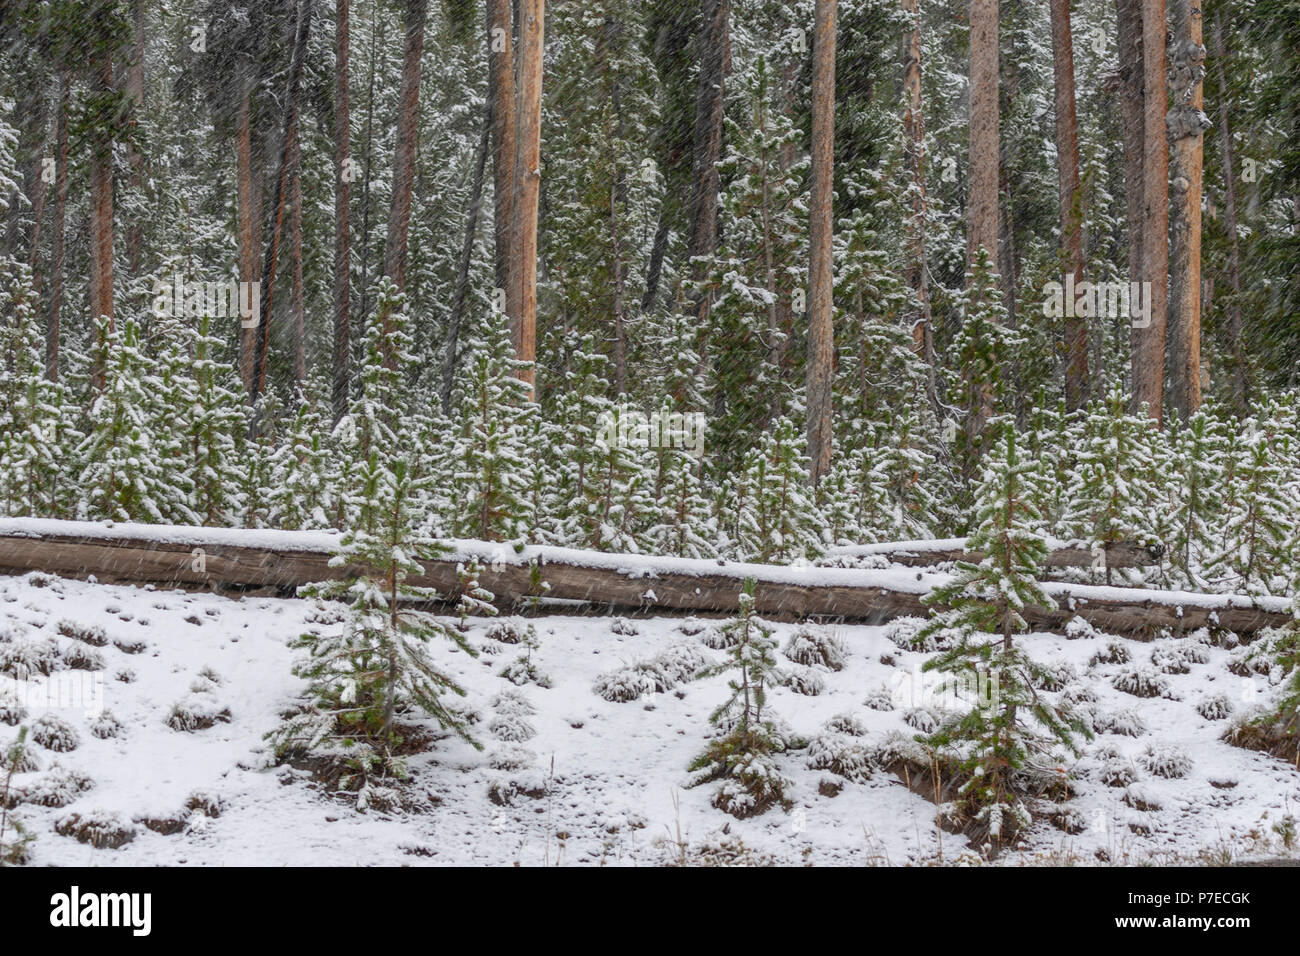 Snow falling in September in Yellowstone National Park in Wyoming. Stock Photo